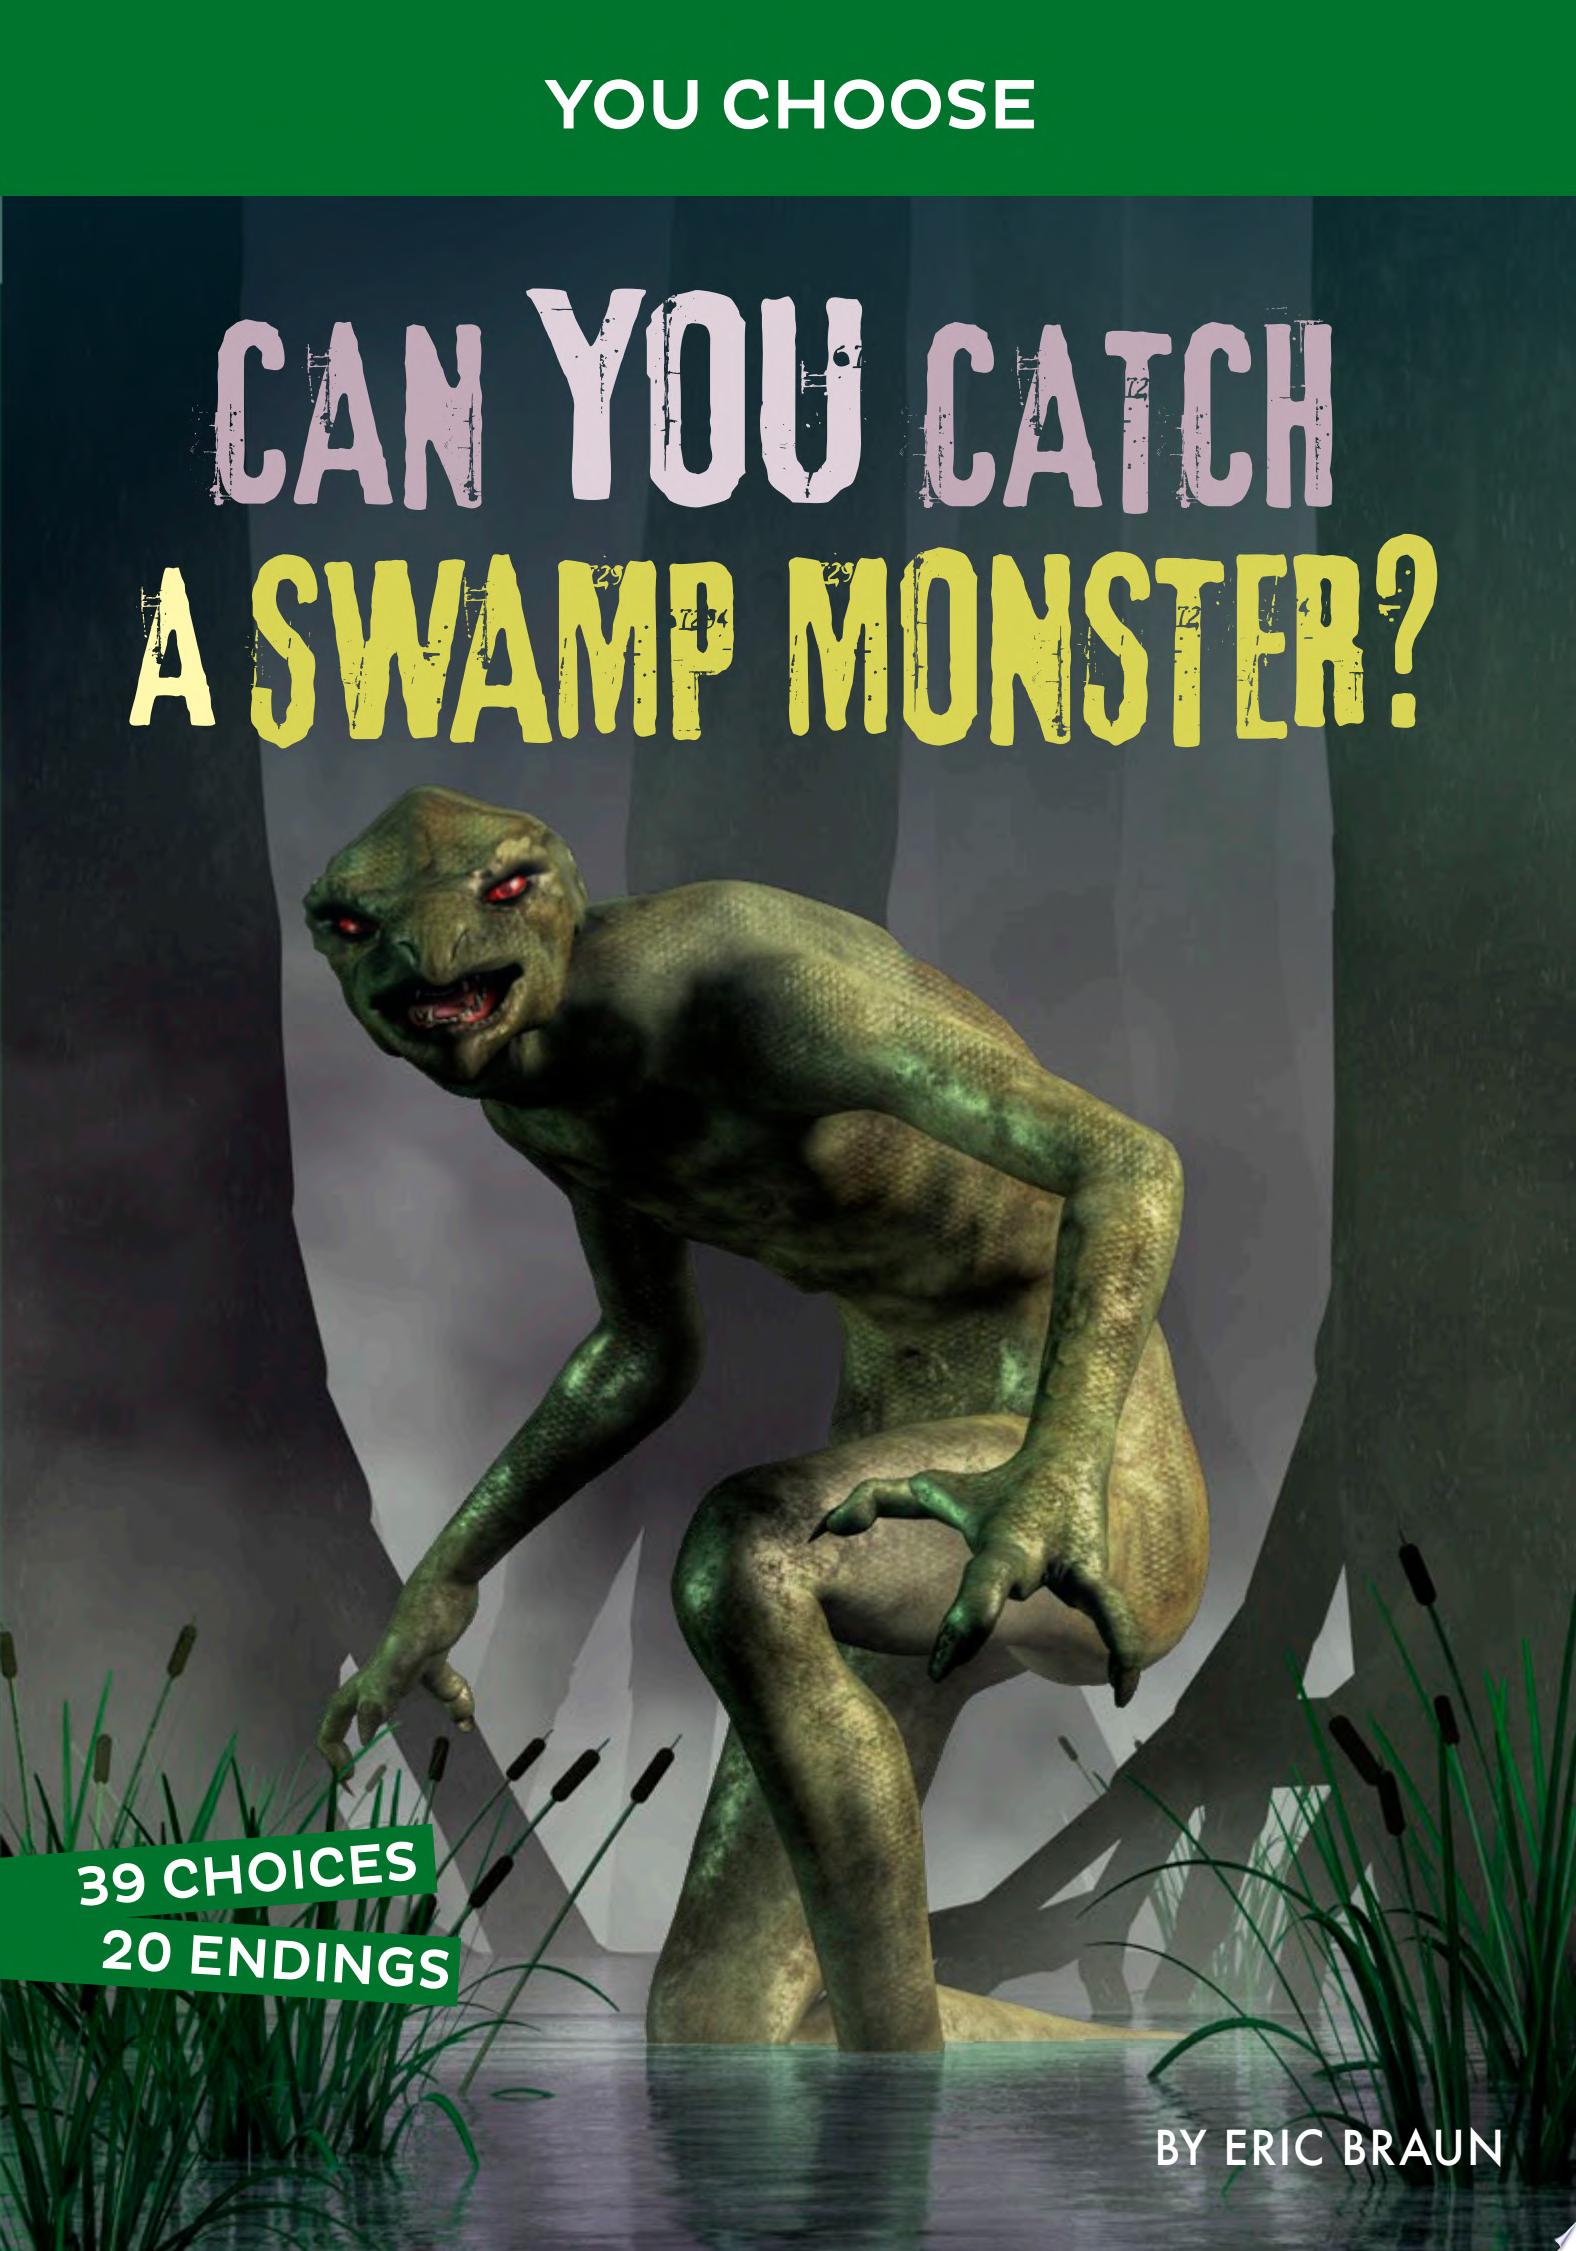 Image for "Can You Catch a Swamp Monster?"